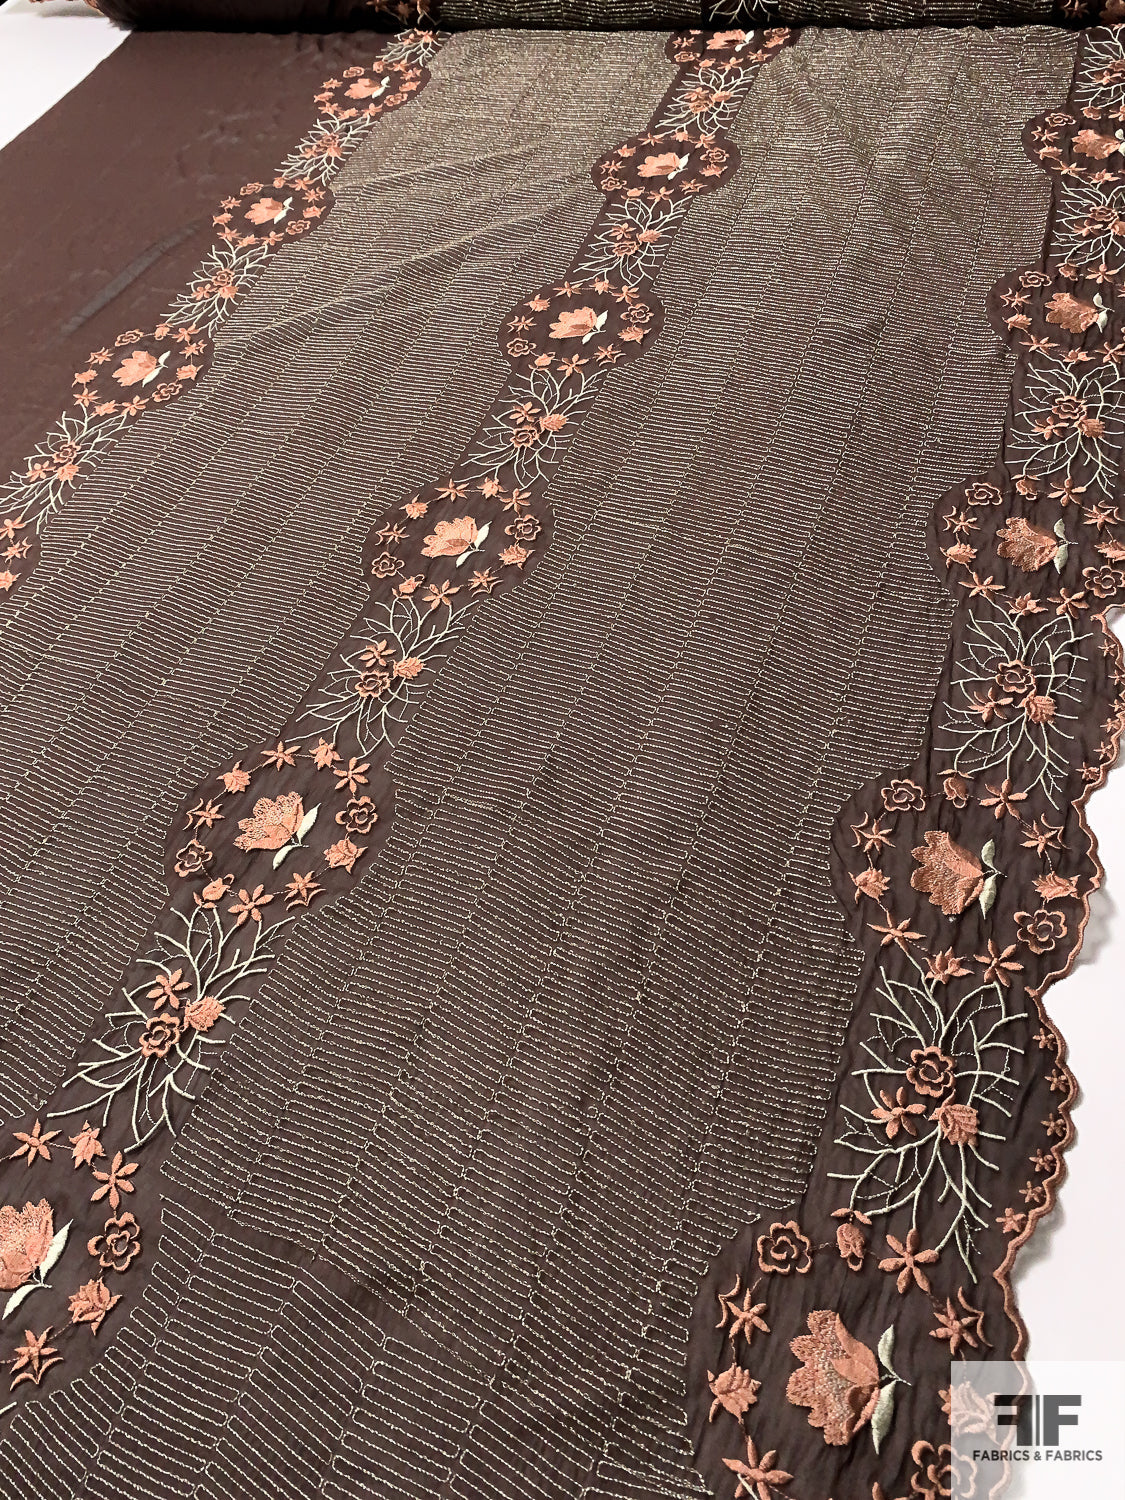 Floral Wreath and Rows Embroidered Silk Chiffon with Lurex Detailing and Scalloped Edge - Brown / Cider Brown / Silver / Sage